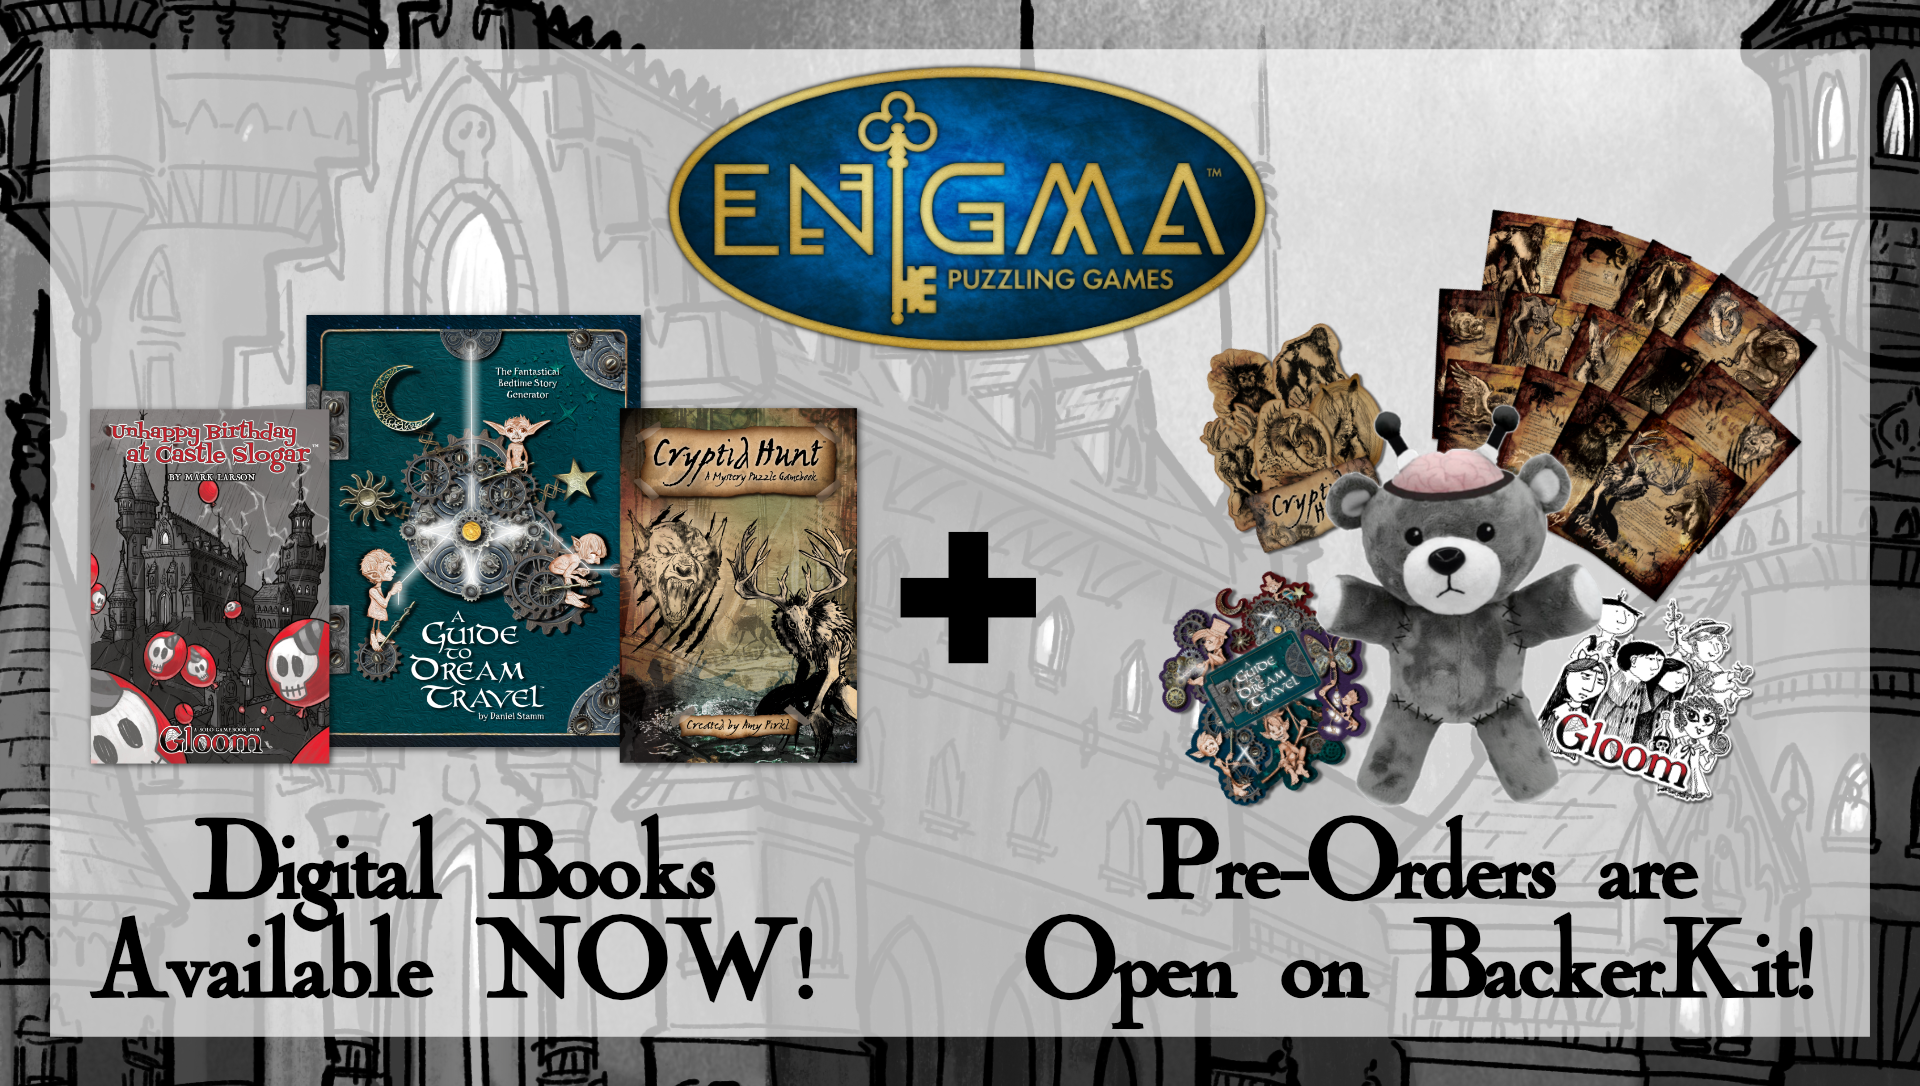 Download or Pre-Order Enigma Gamebooks NOW!